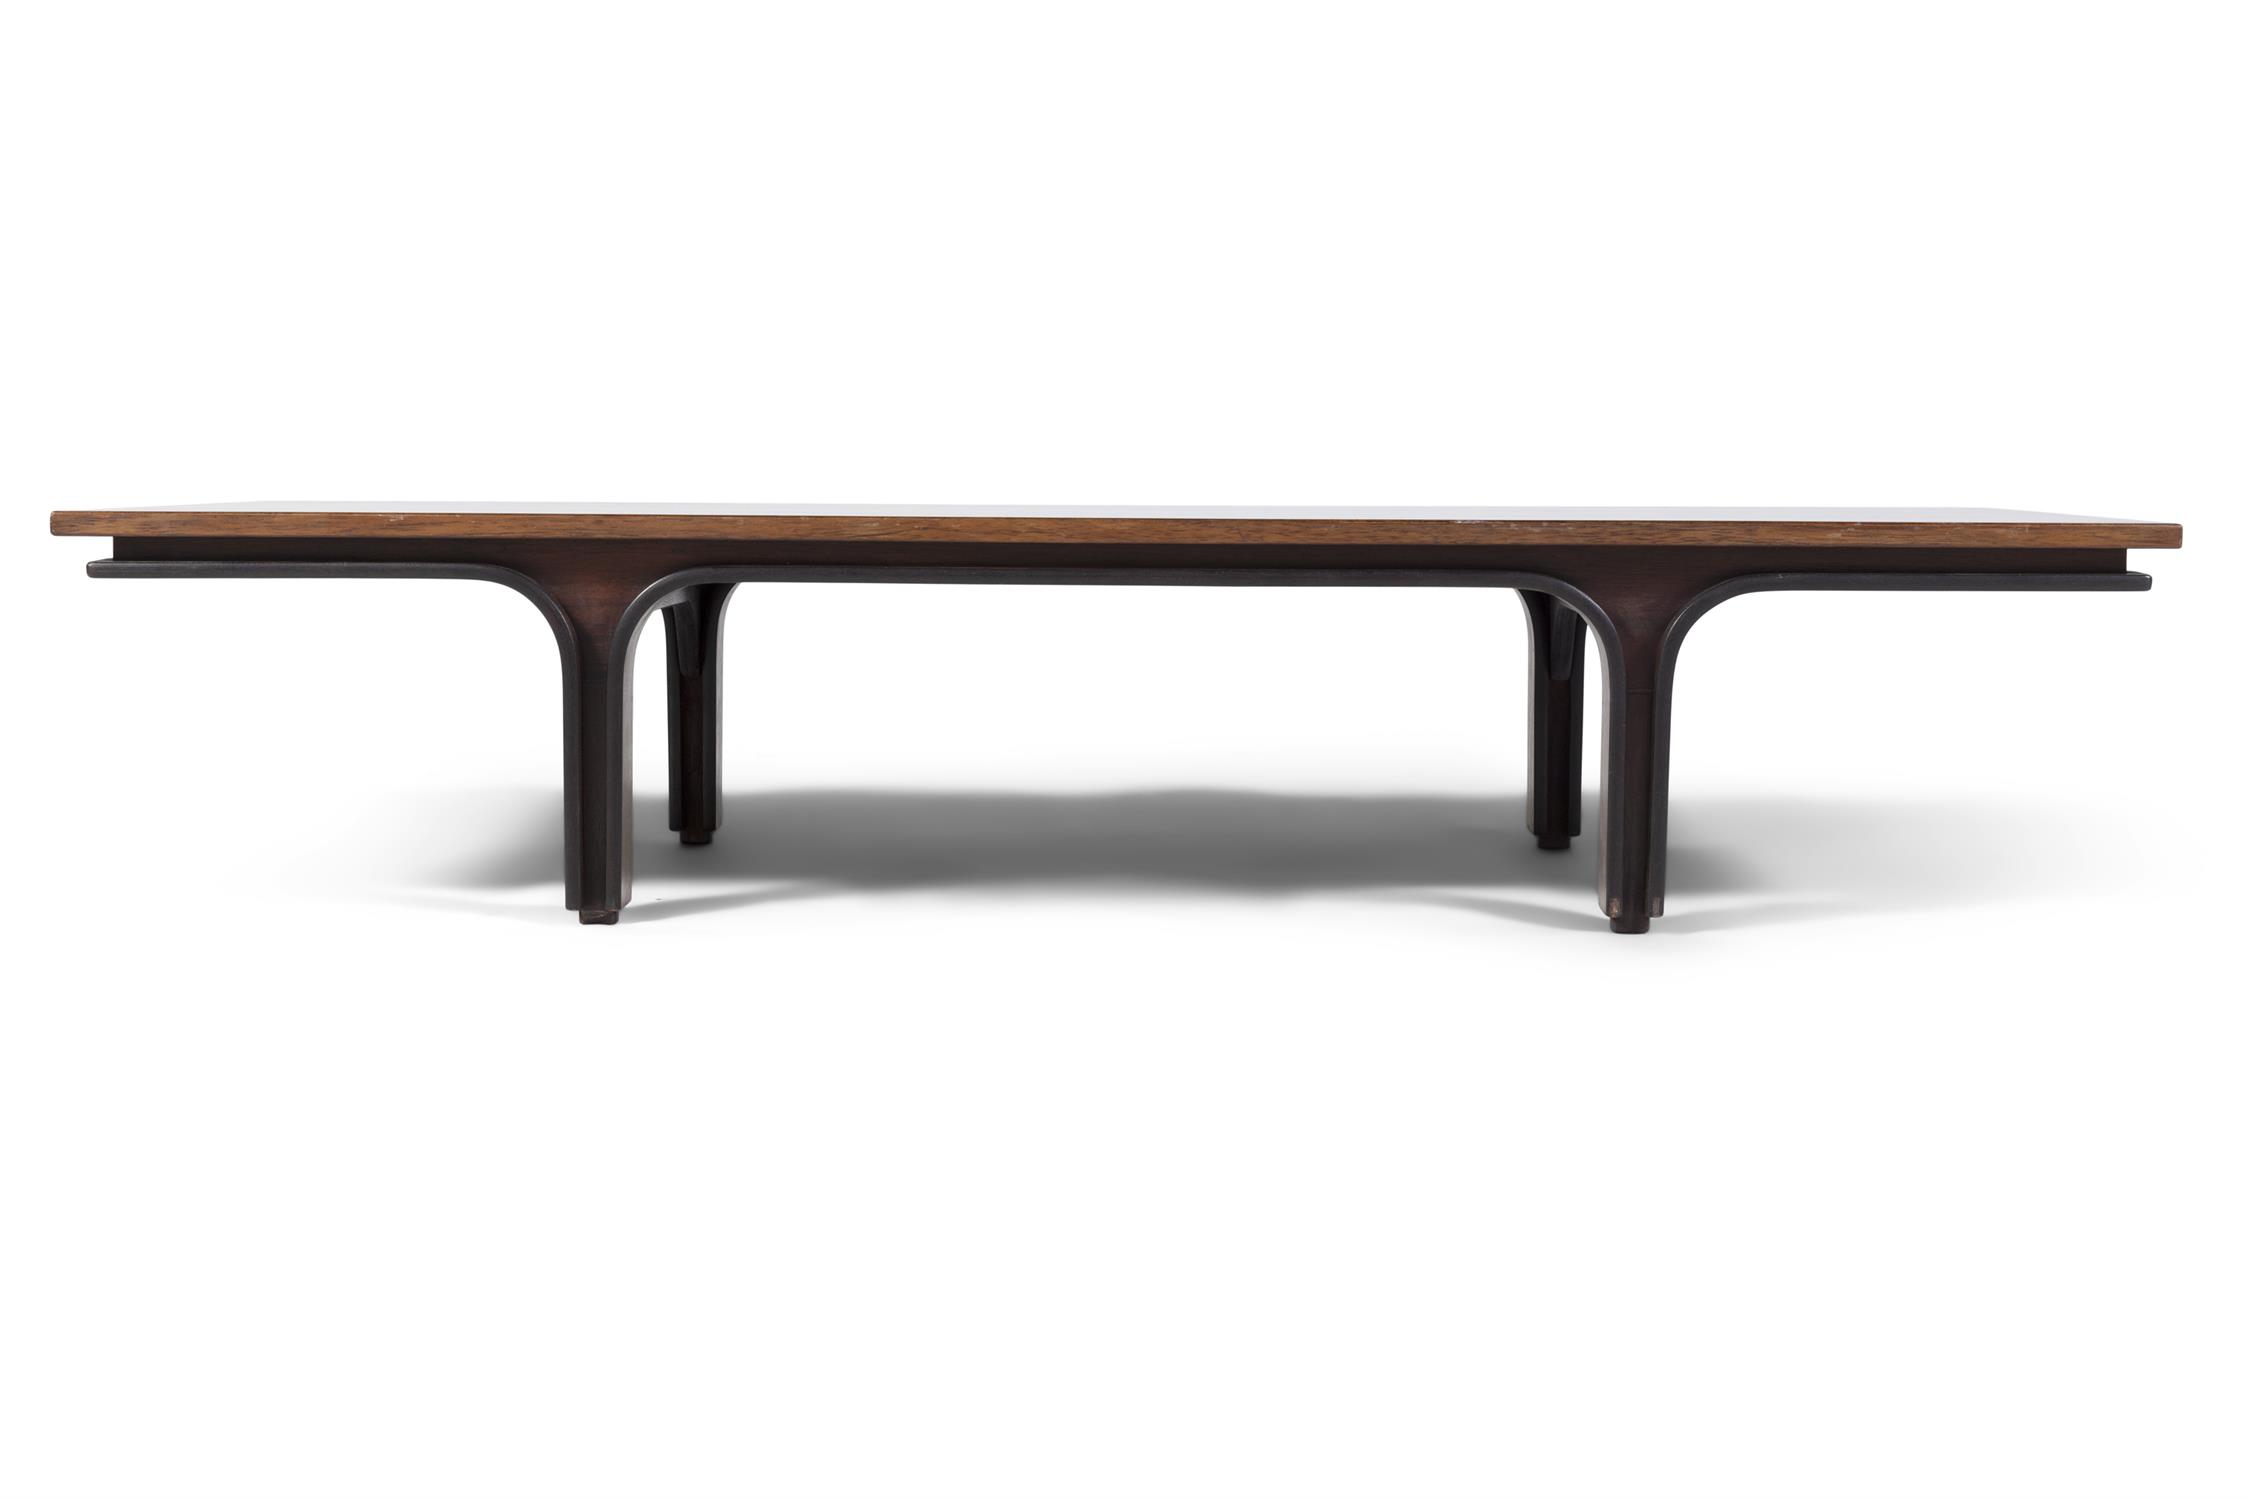 GIANFRANCO FRATTINI (1926 - 2004) A rosewood rectangular coffee table by Gianfranco Frattini for - Image 2 of 4